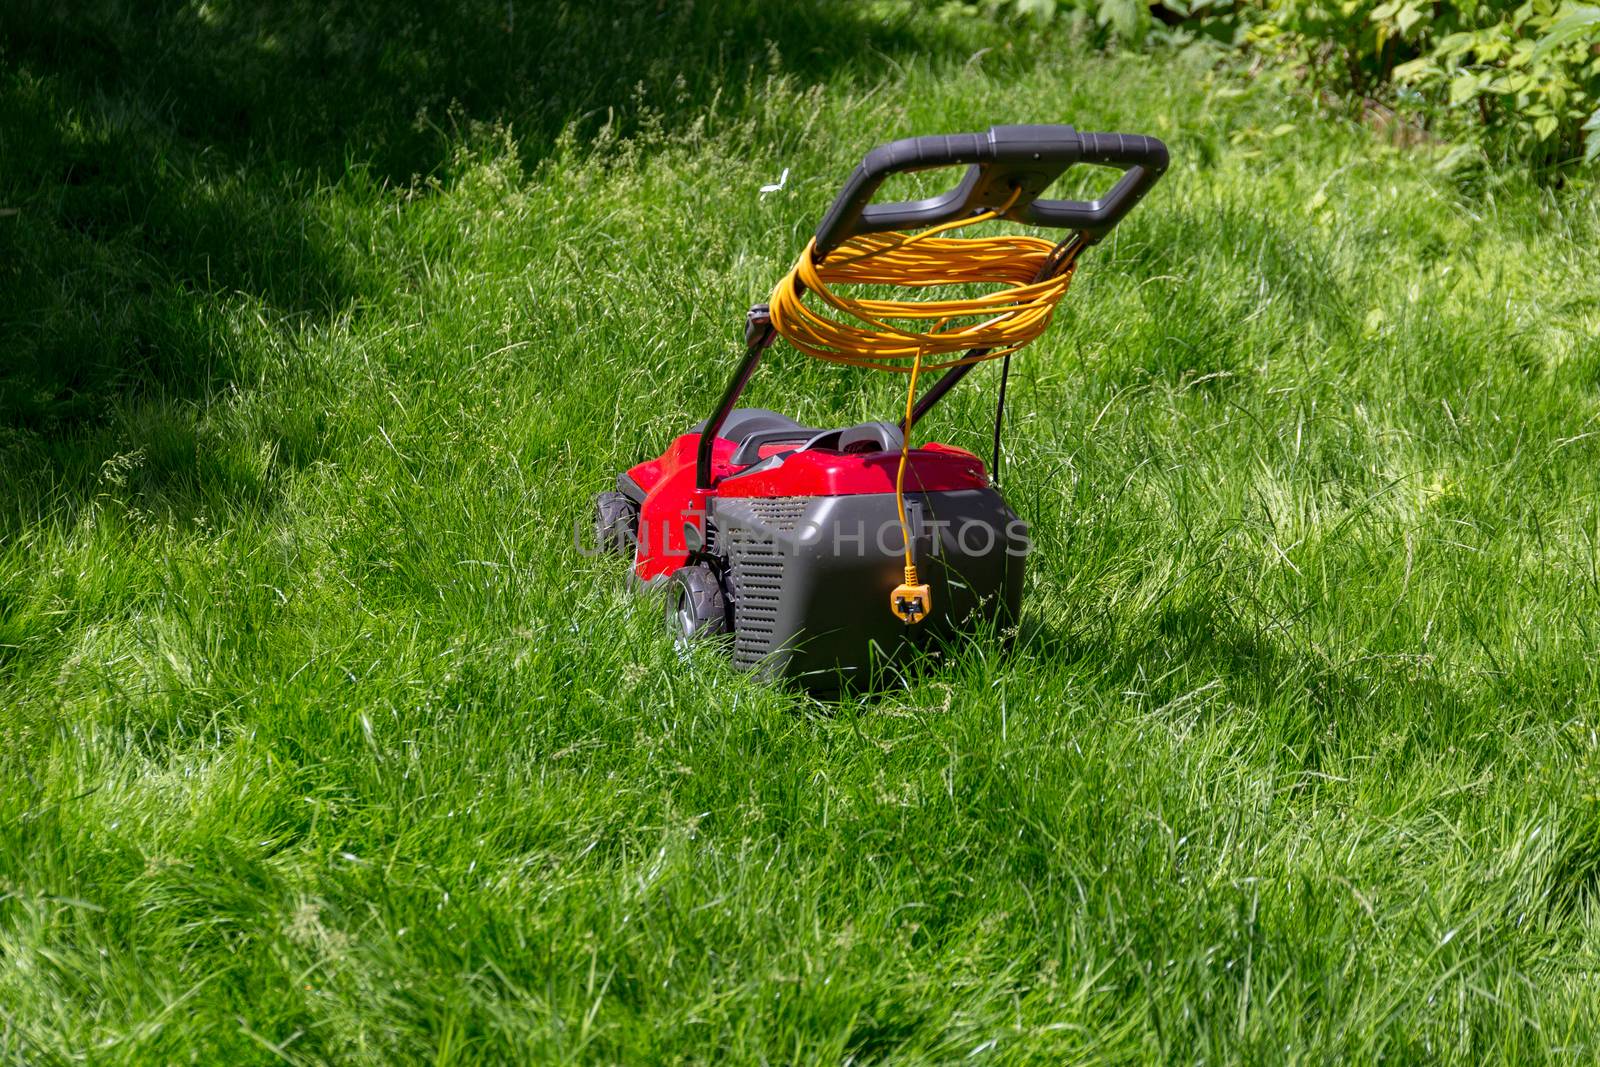 A lawnmower on a lawn of long grass in need of cutting